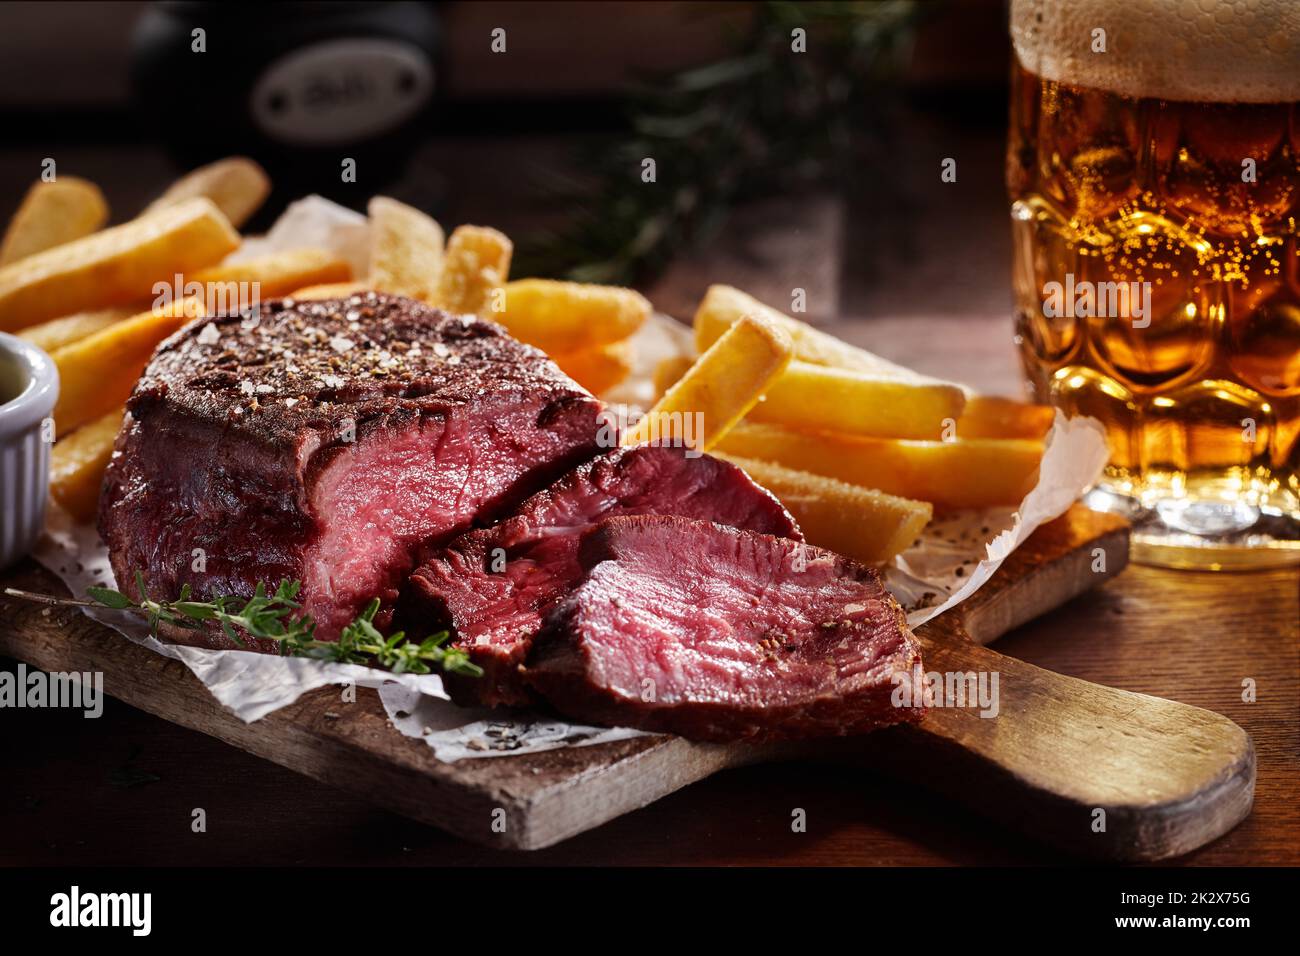 Tasty beef steak slices with French fries and beer Stock Photo